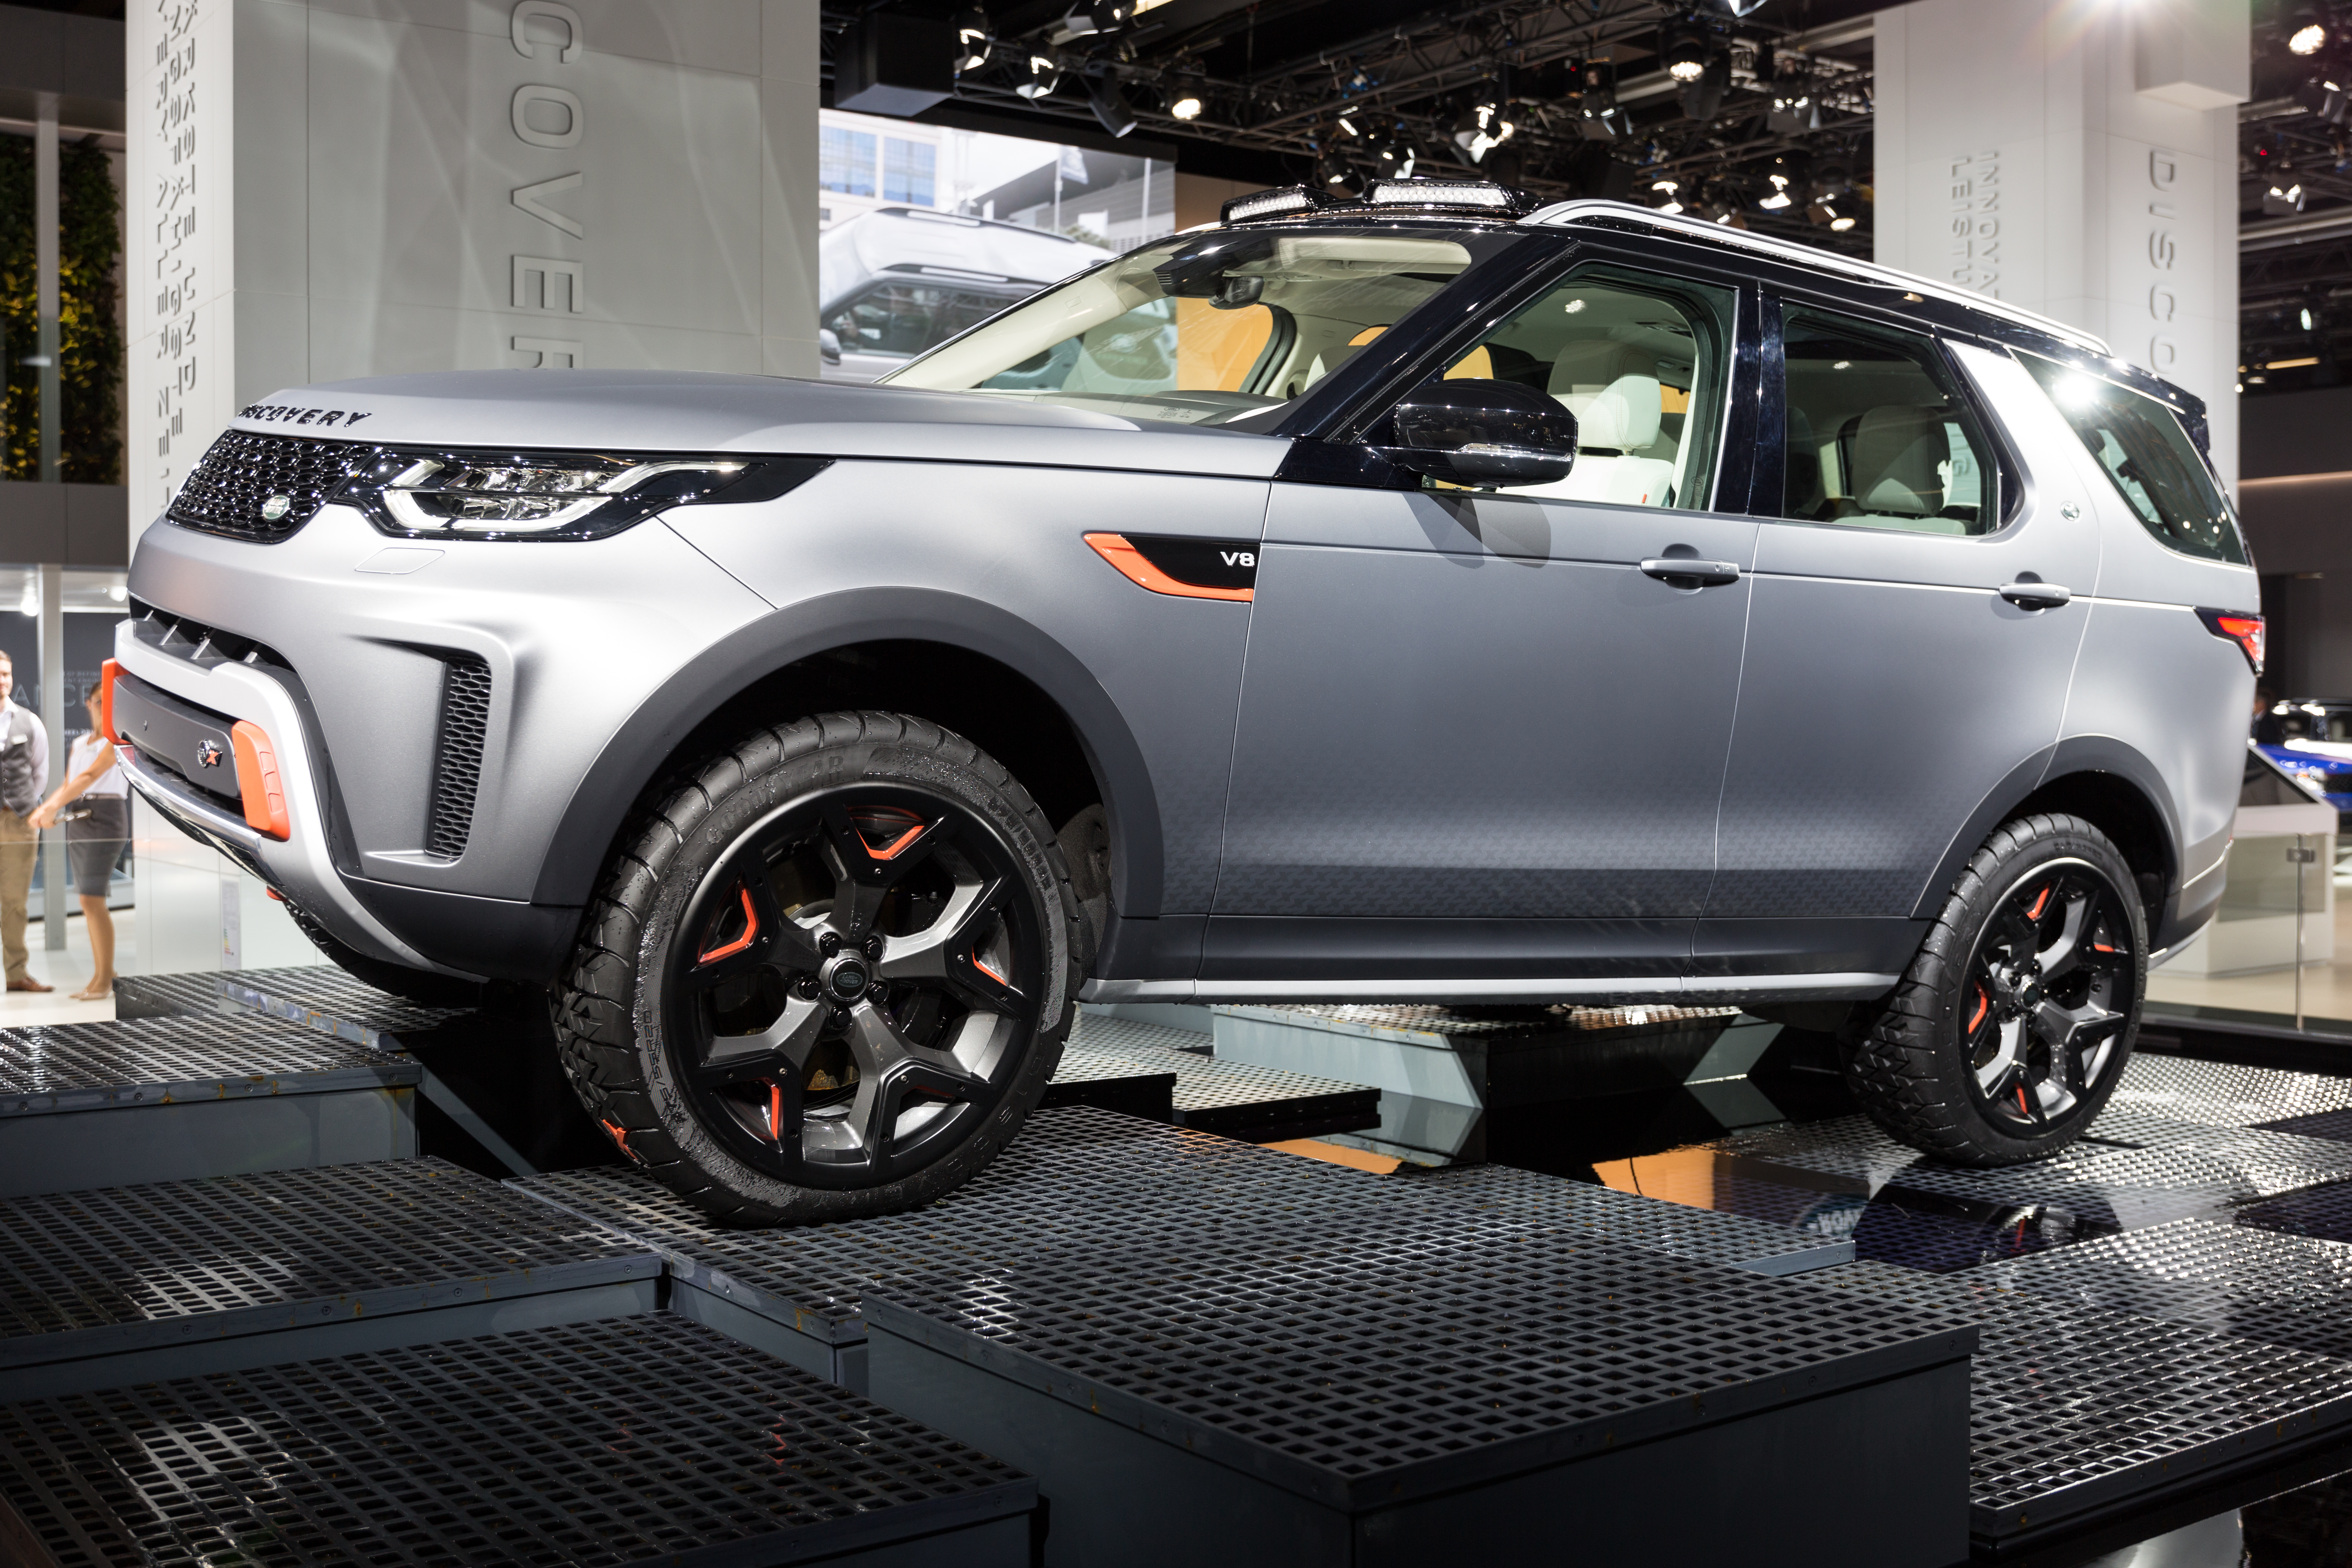 The 2017 Land Rover Discovery